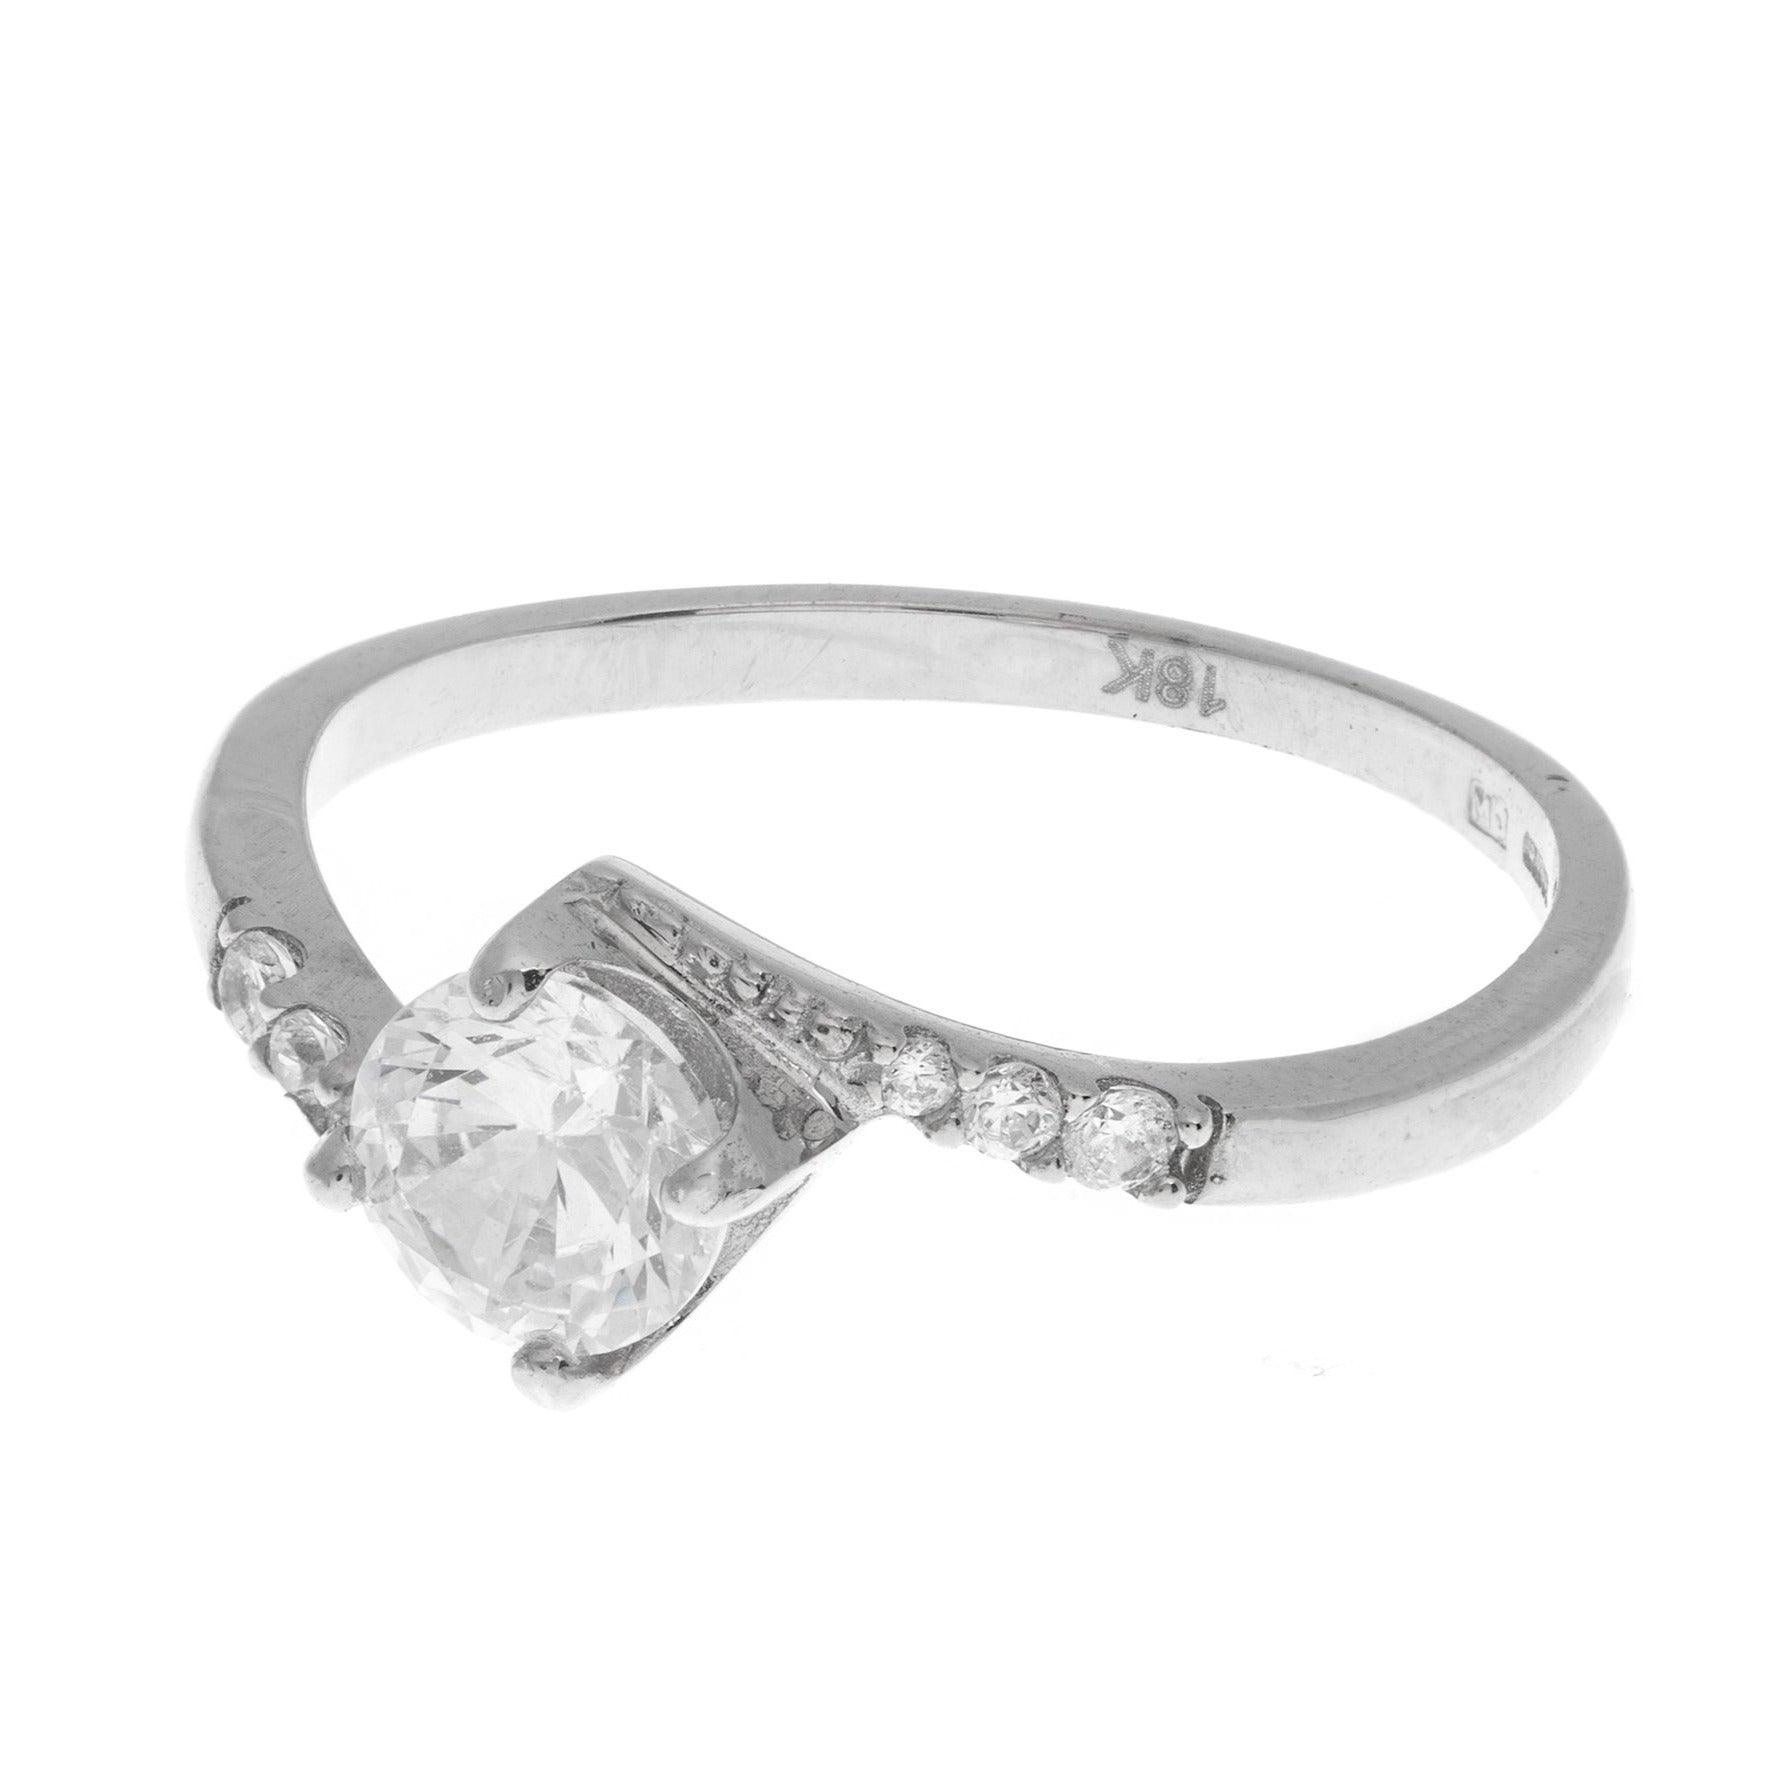 18ct White / Yellow Gold Cubic Zirconia Engagement Ring (LR-3833)